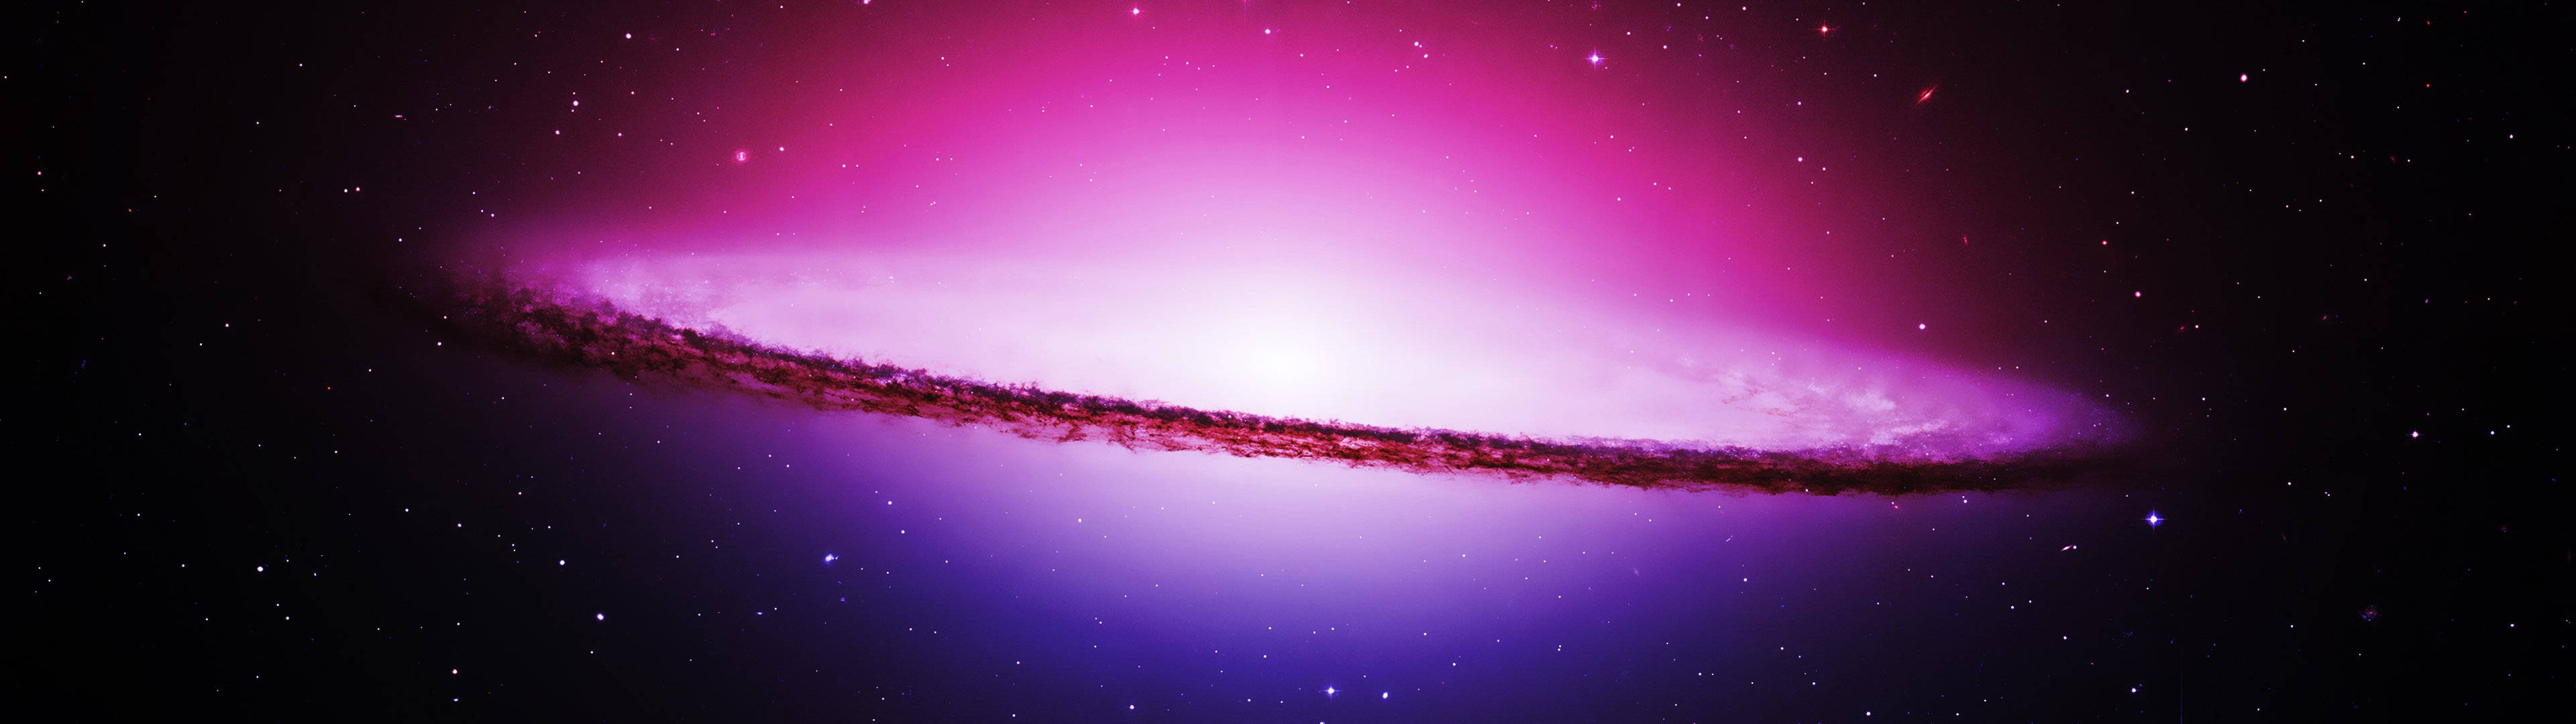 3840x1080 Hd Dual Monitor Milky Way Picture